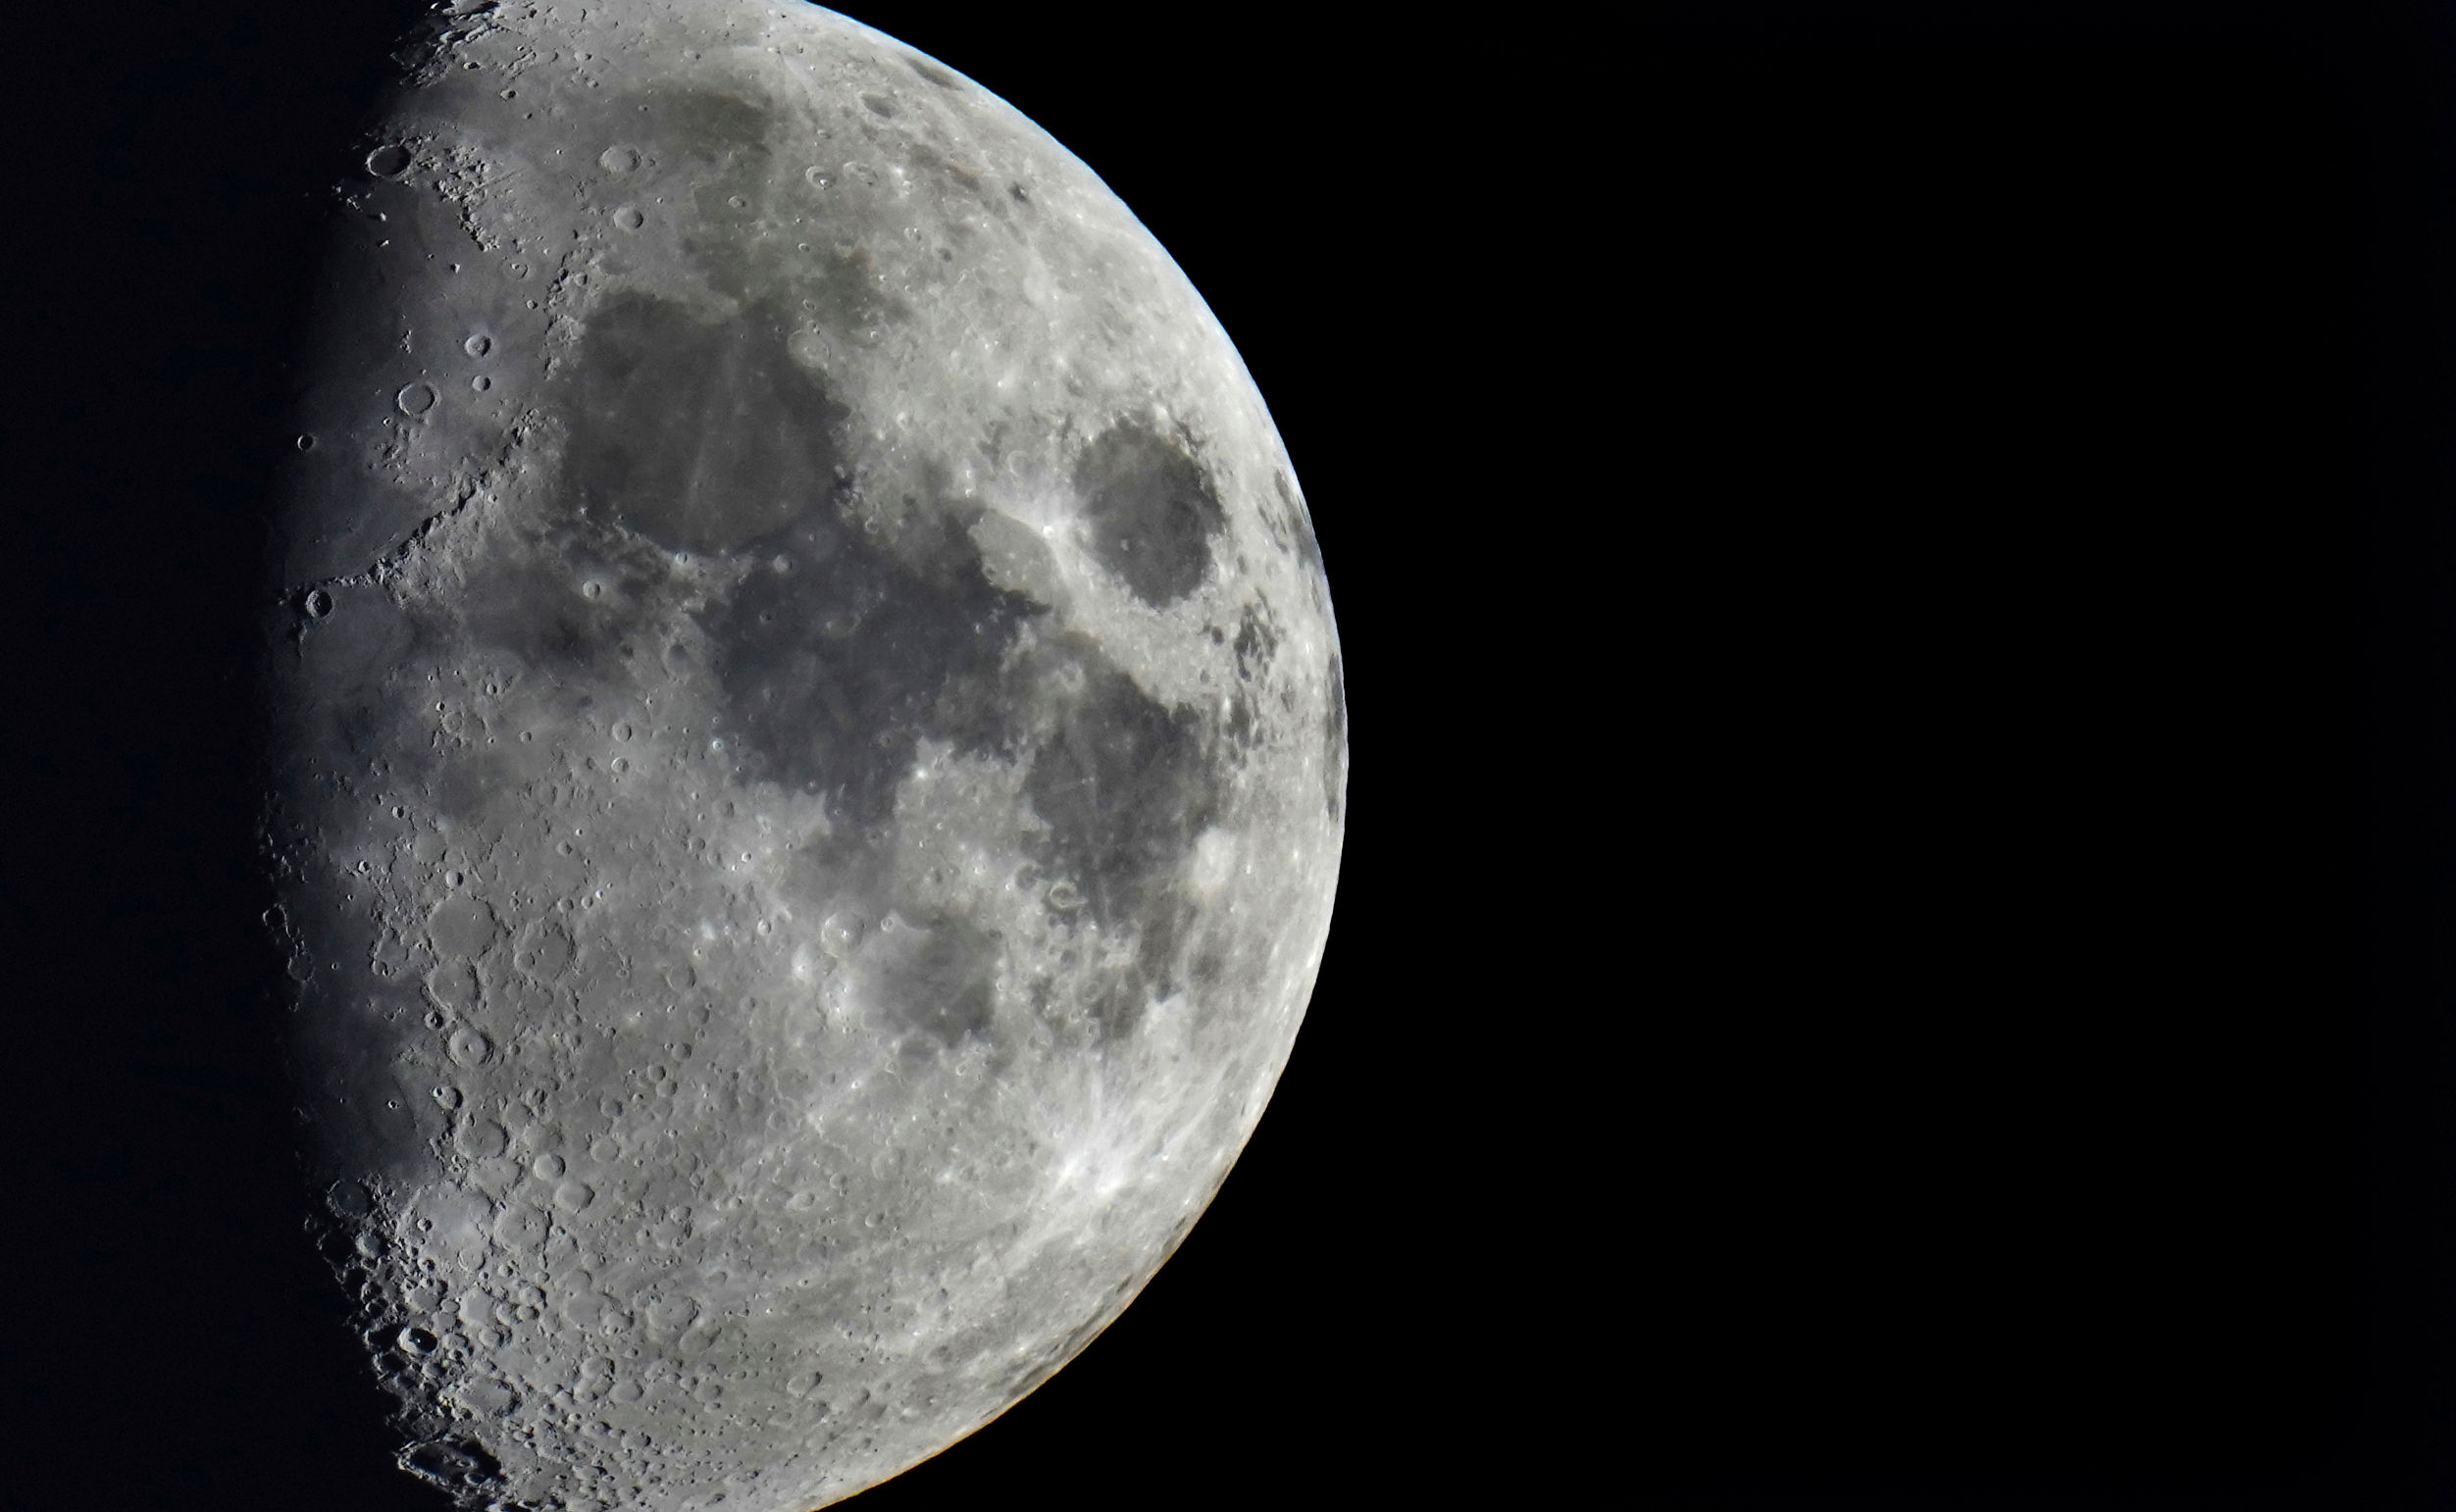 China plans 3 Moon missions after lunar mineral discovery